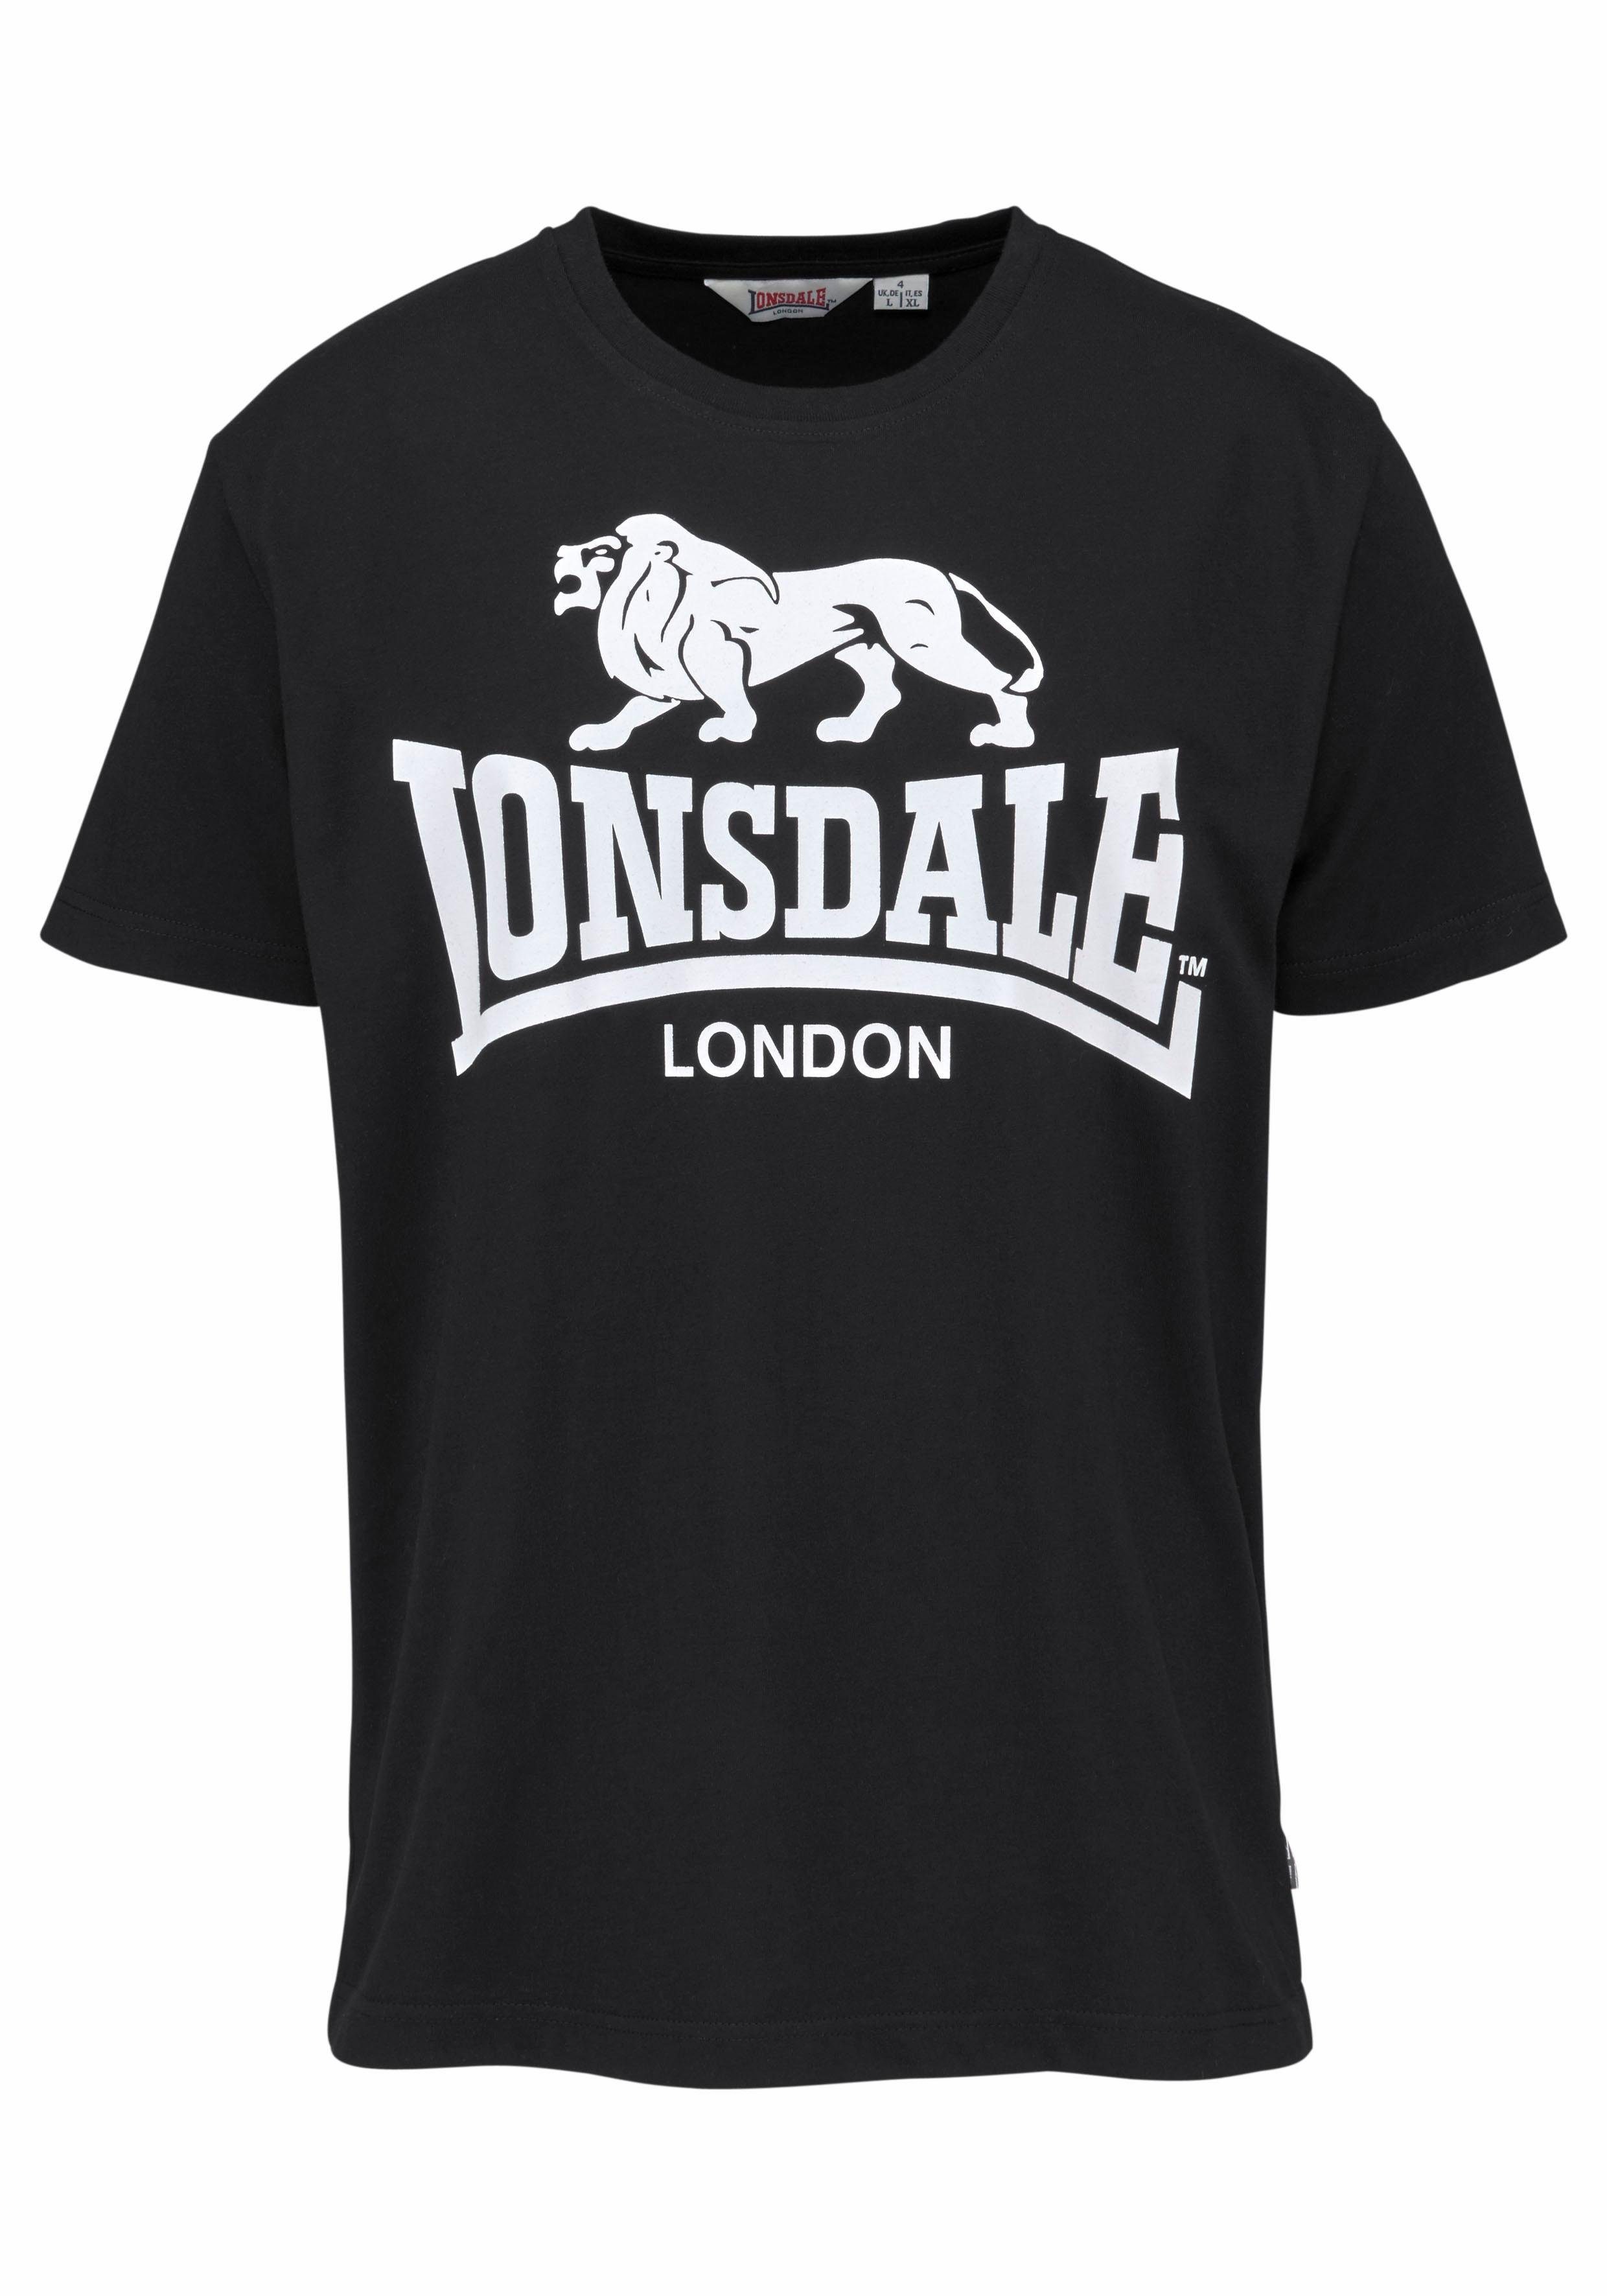 2-tlg., T-Shirt Lonsdale 2er-Pack) (Packung, DILDAWN